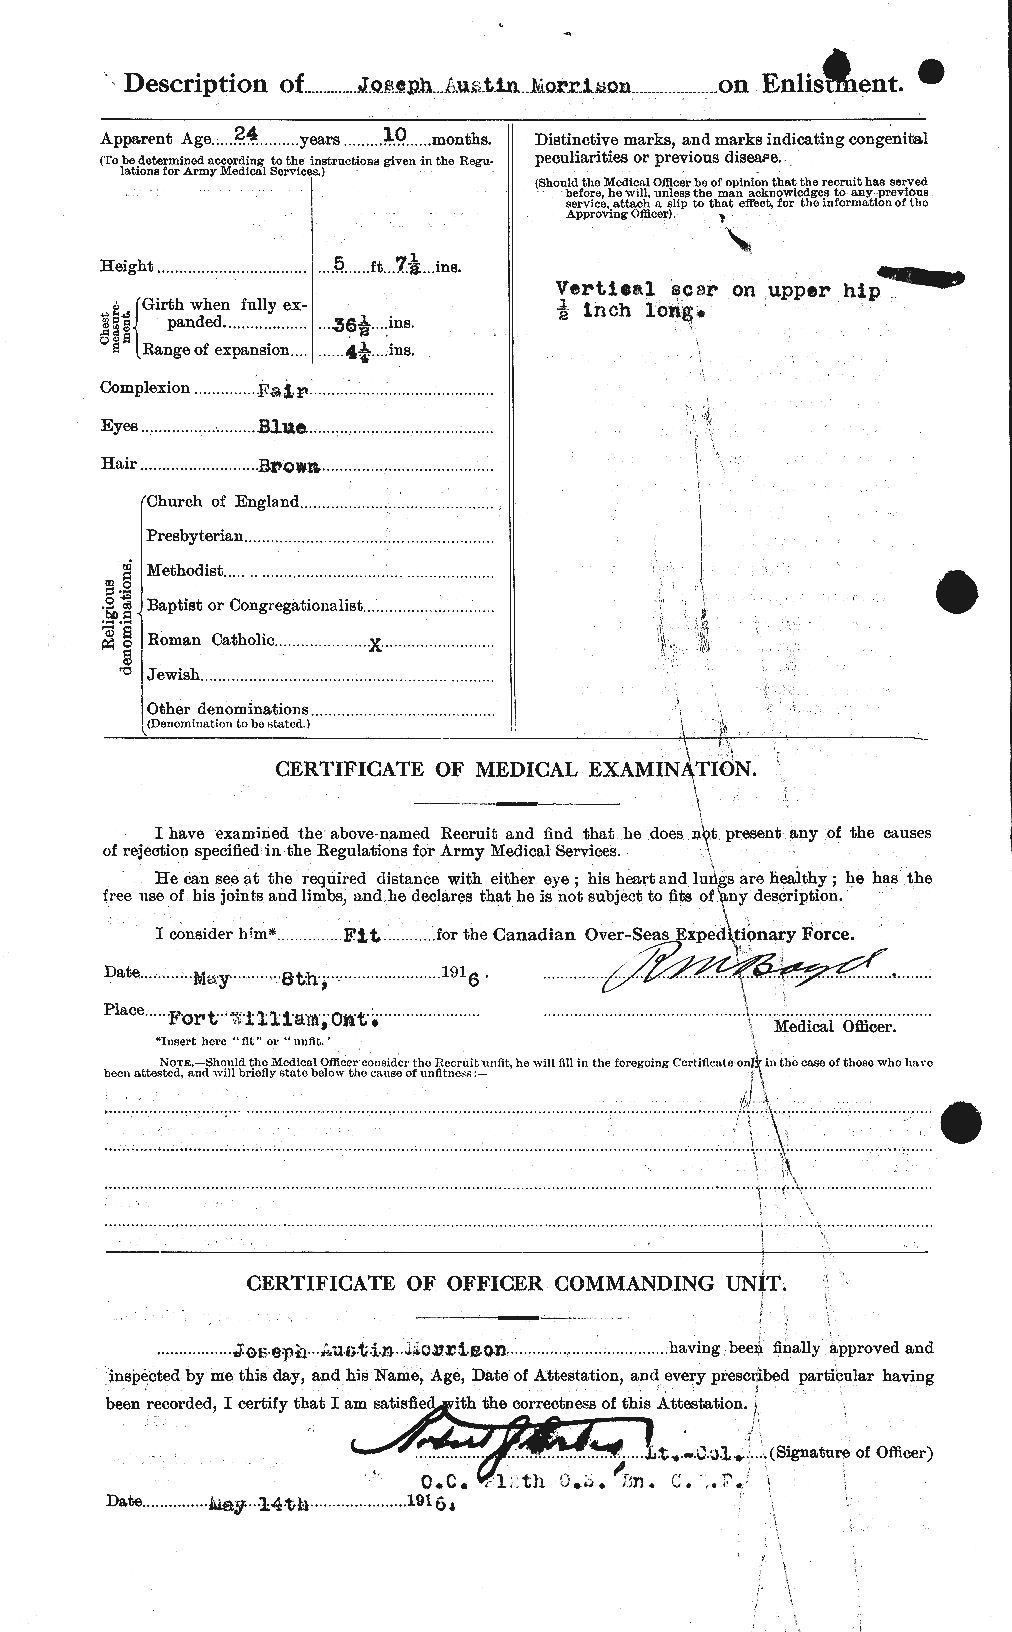 Personnel Records of the First World War - CEF 507090b